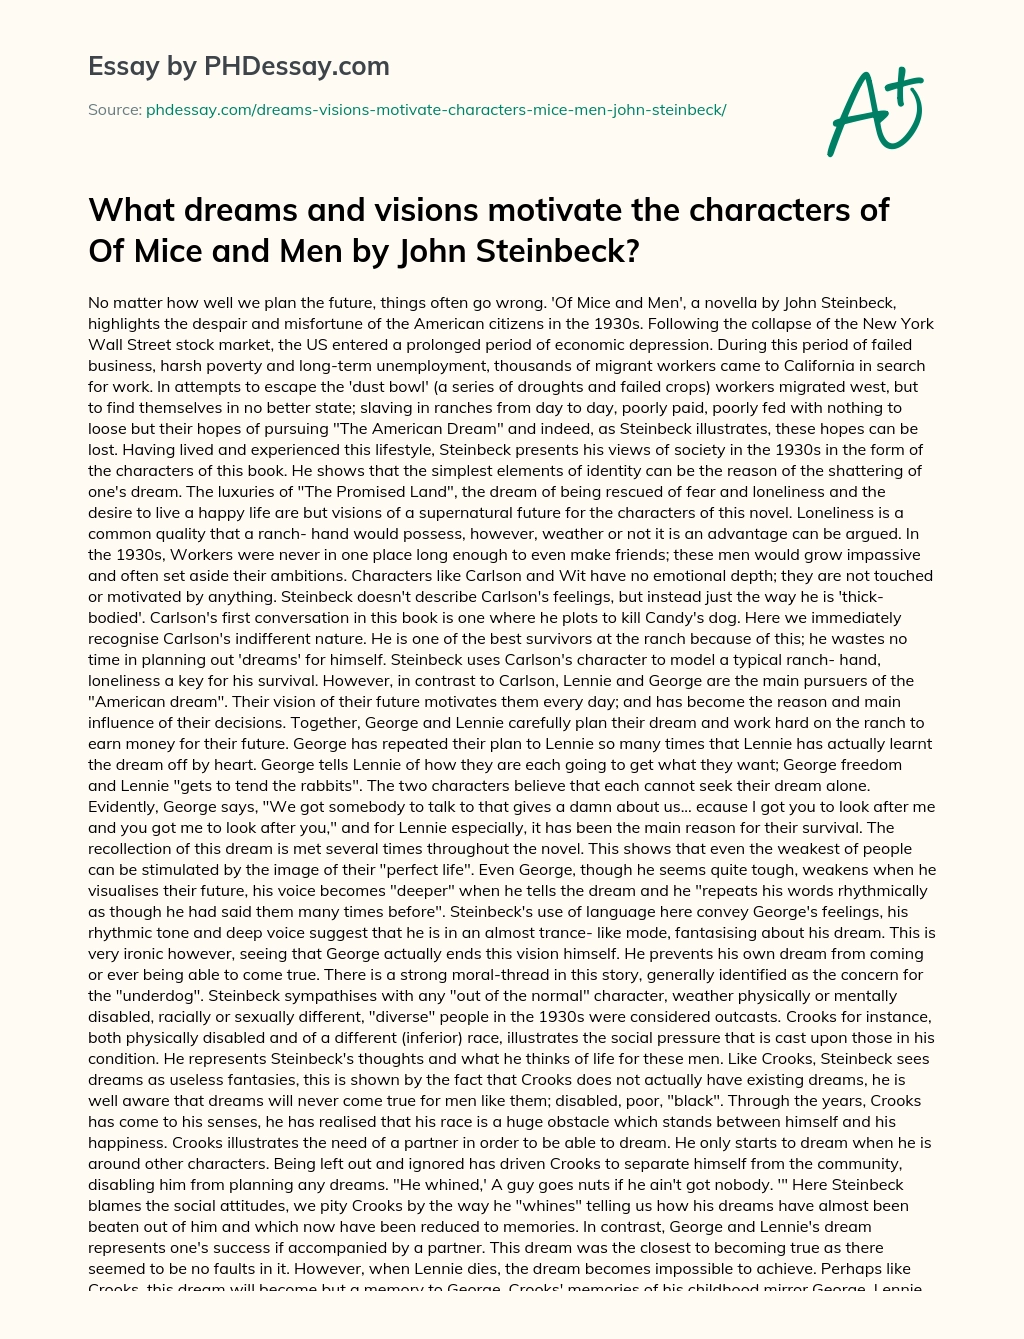 What dreams and visions motivate the characters of Of Mice and Men by John Steinbeck? essay